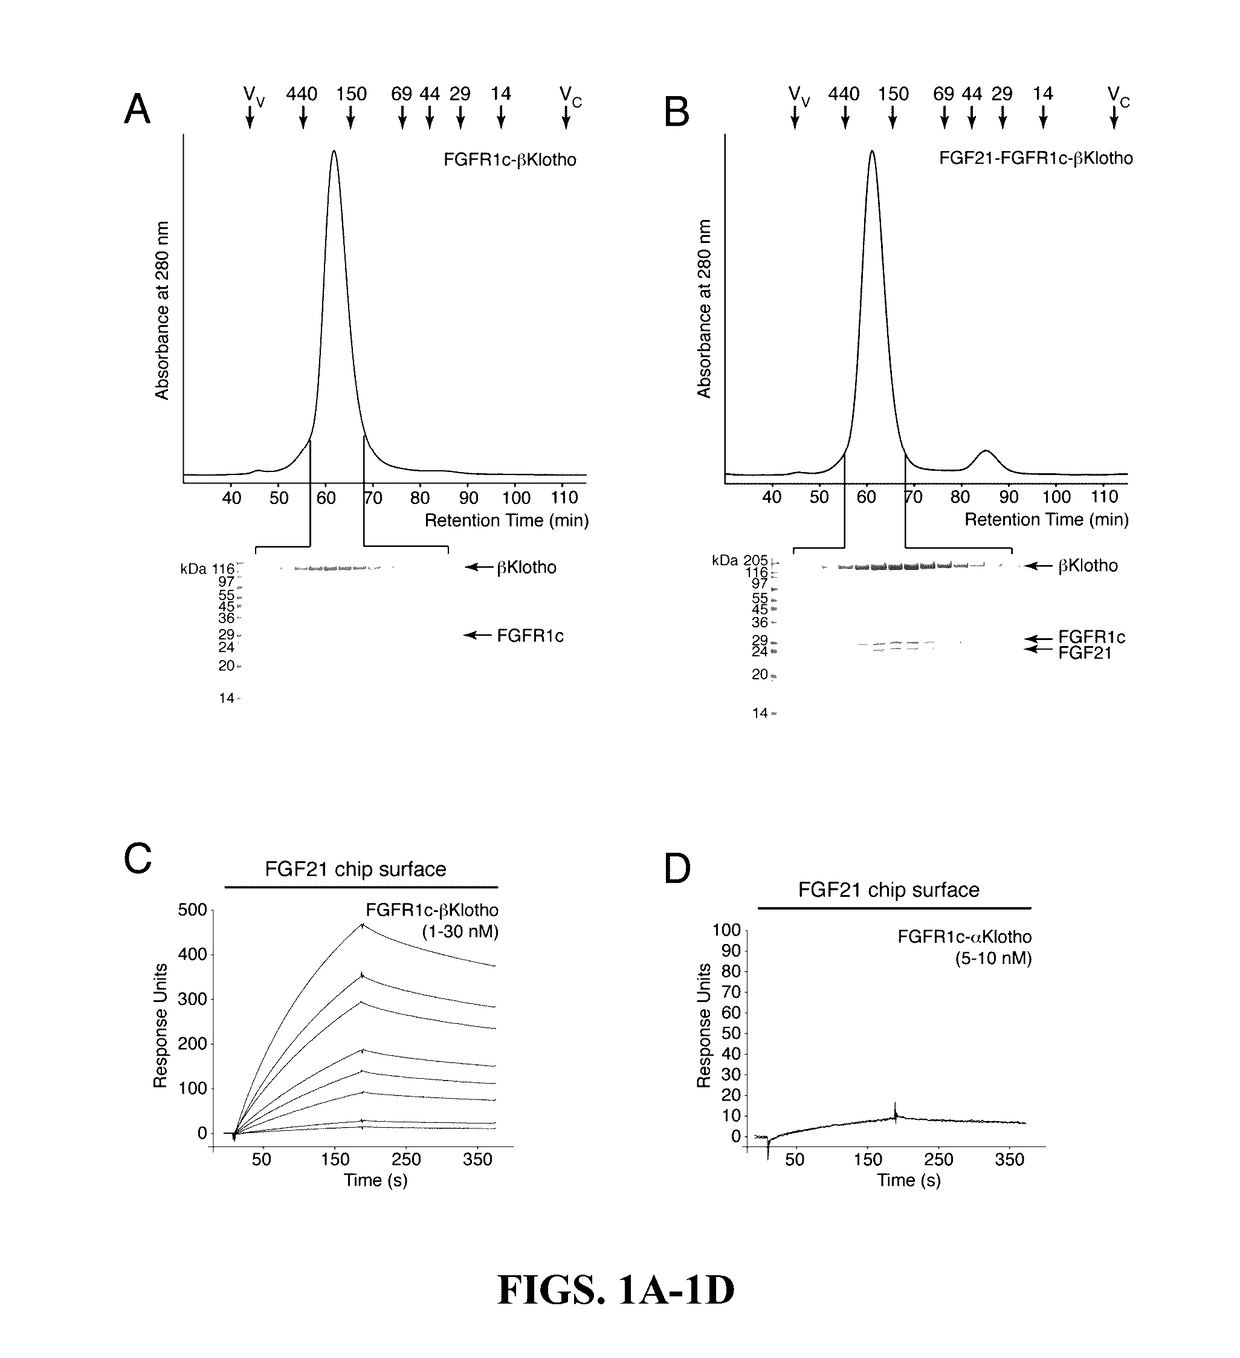 Chimeric fgf21 proteins with enhanced binding affinity for beta-klotho for the treatment of type ii diabetes, obesity, and related metabolic disorders